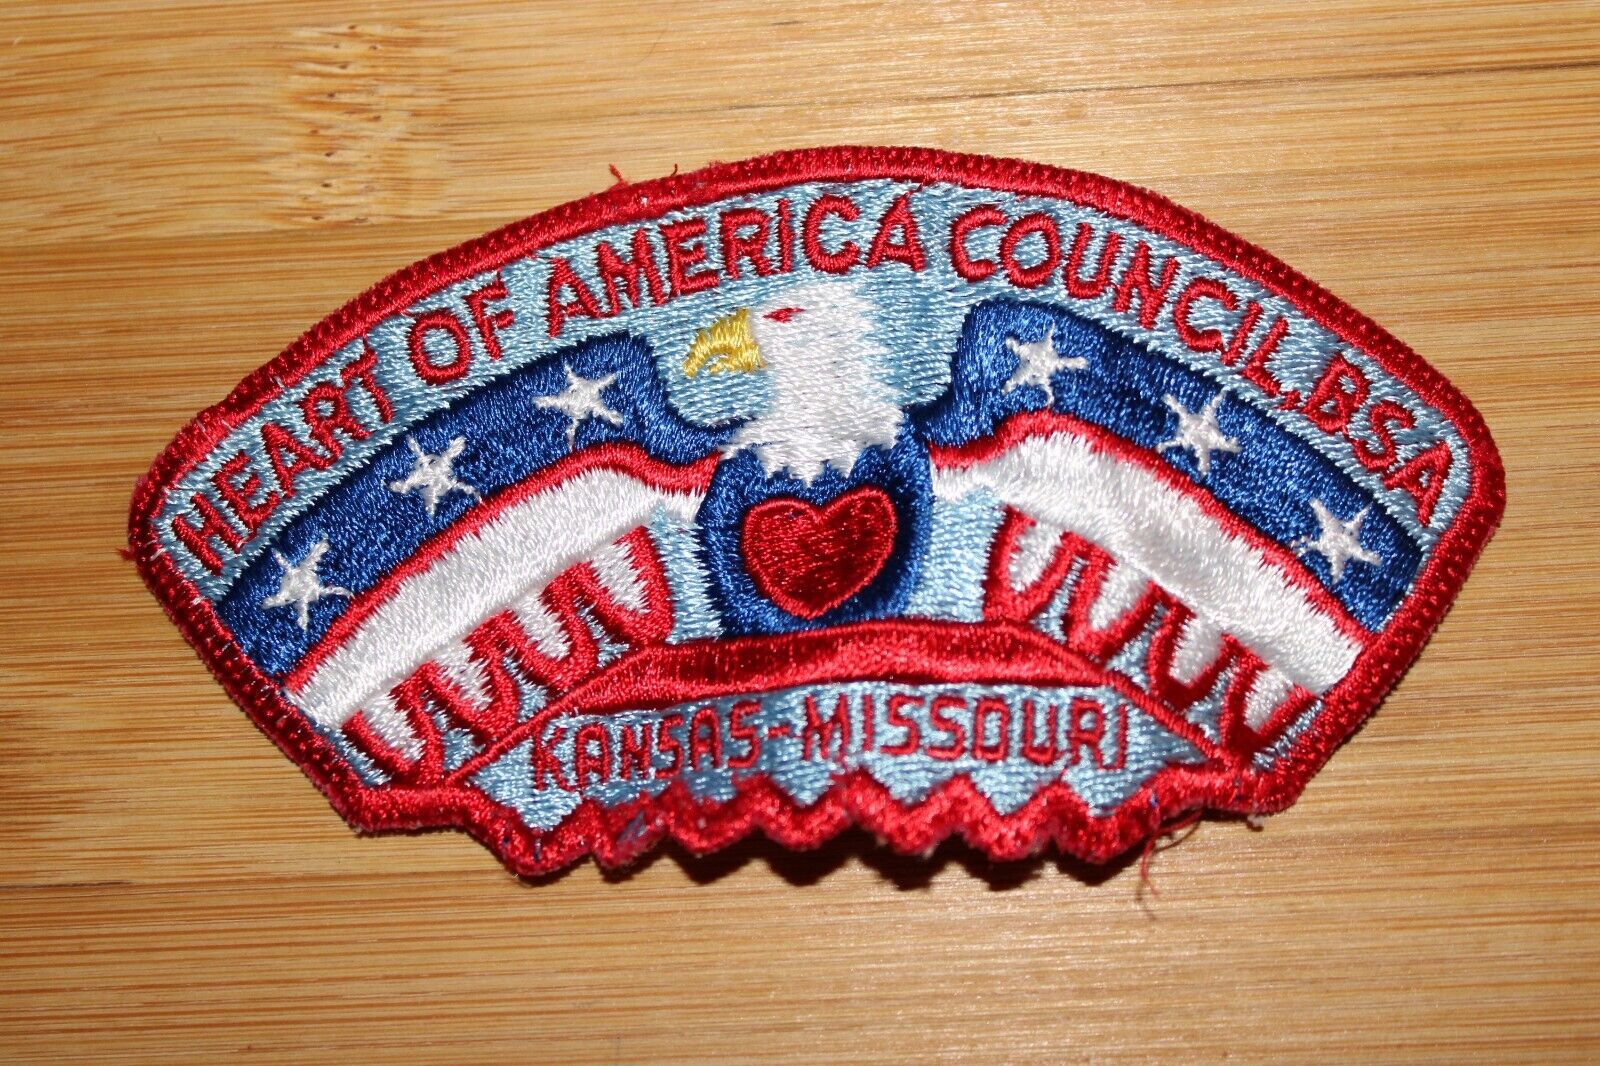 Heart of America Council Boy Scouts of America BSA Patch